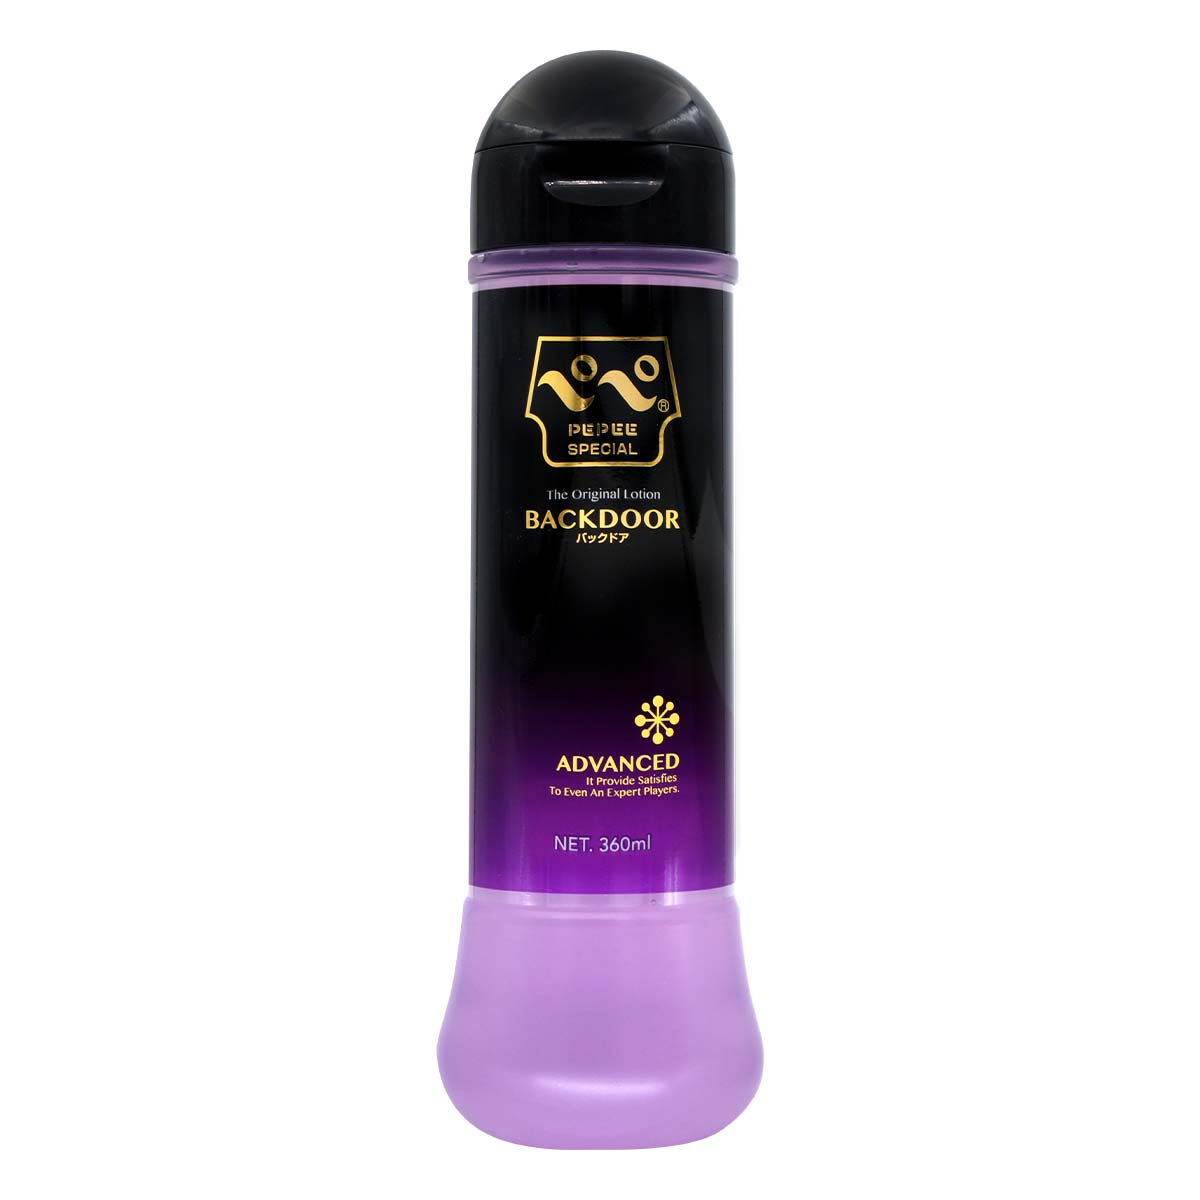 PEPEE Special Backdoor 360ml water-based lubricant-p_2